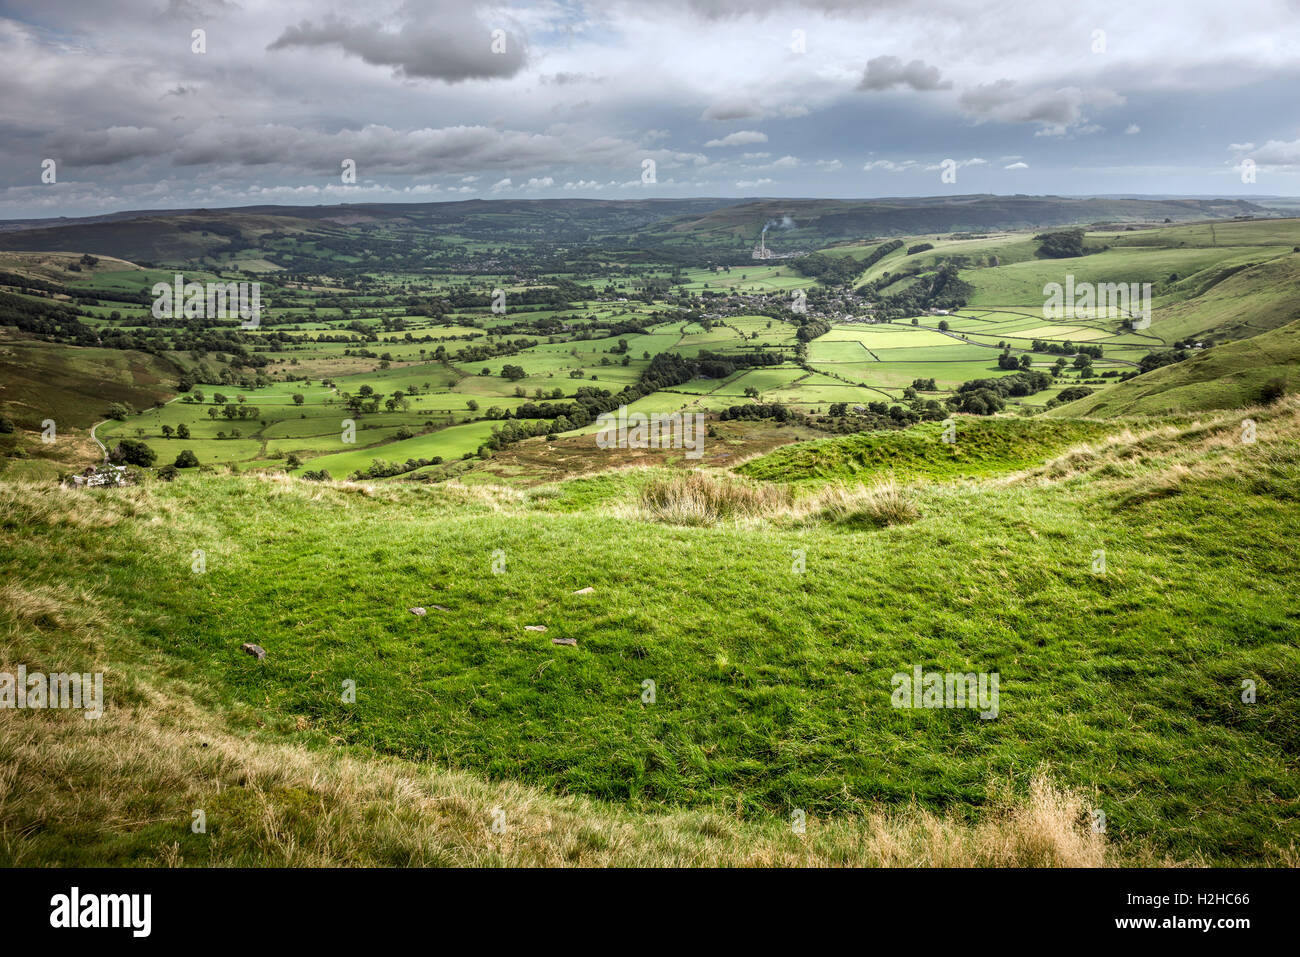 Mam Tor Iron Age hill fort in the Peak District National Park, Derbyshire, UK Stock Photo